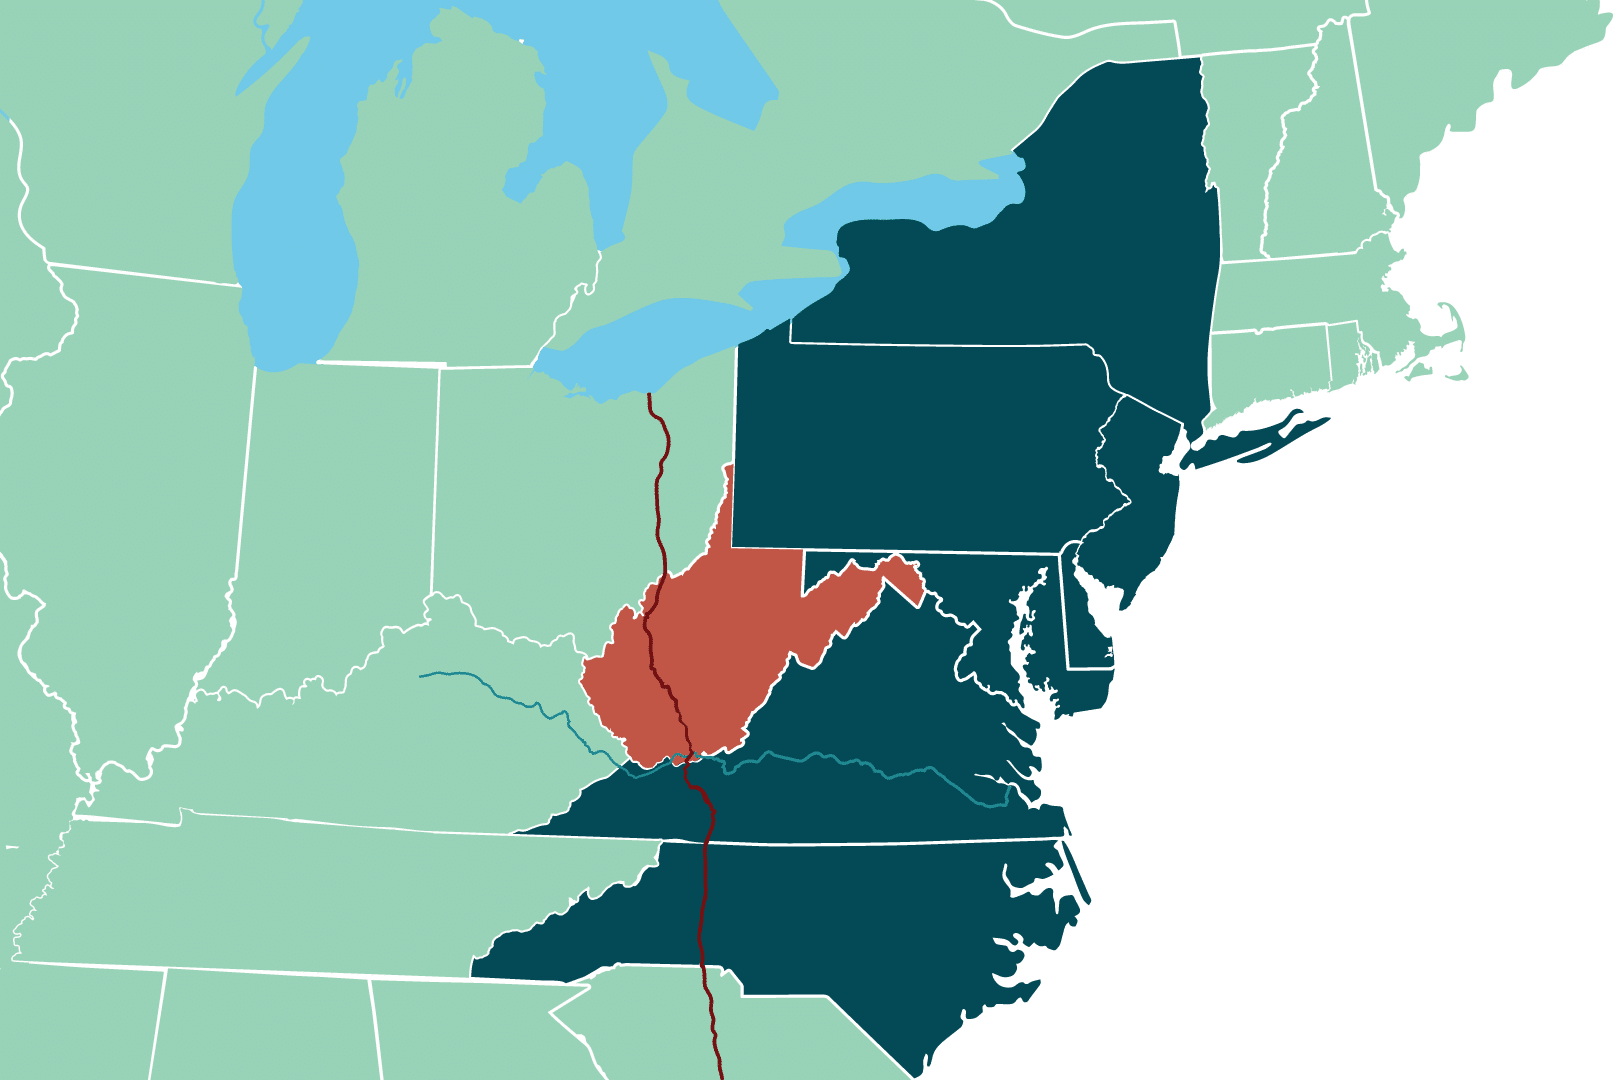 West Virginia is highlighted in orange with a map pin over Princeton. NY, PA, DE, MD, VA, and NC are in dark green to represent the mid-atlantic states. Highlighted is I-77 is US Route 460.